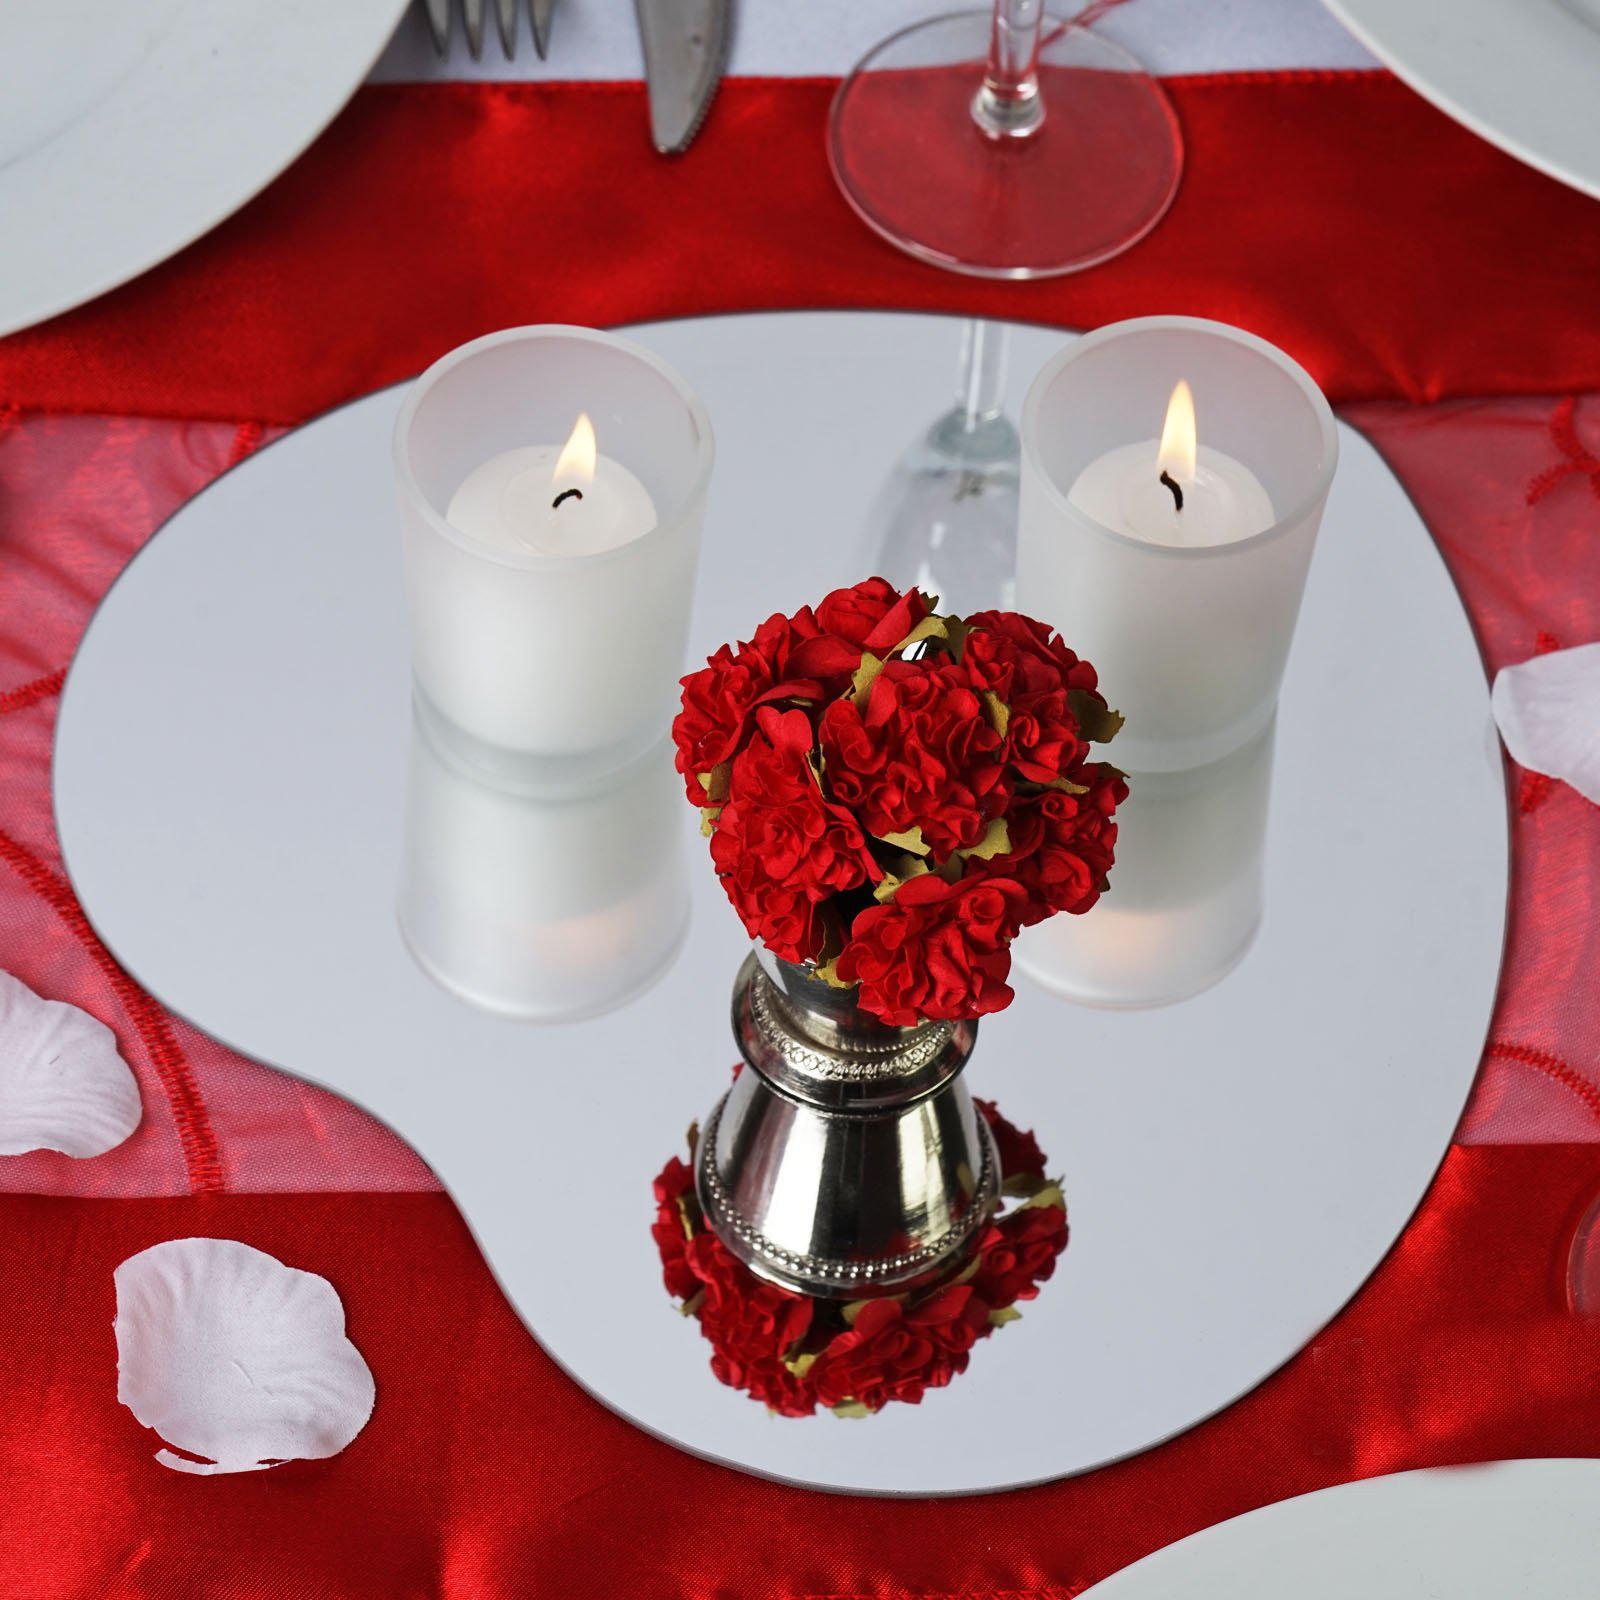 Buy 12 Pack Red Heart Shaped Tea Light Candles at Tablecloth Factory